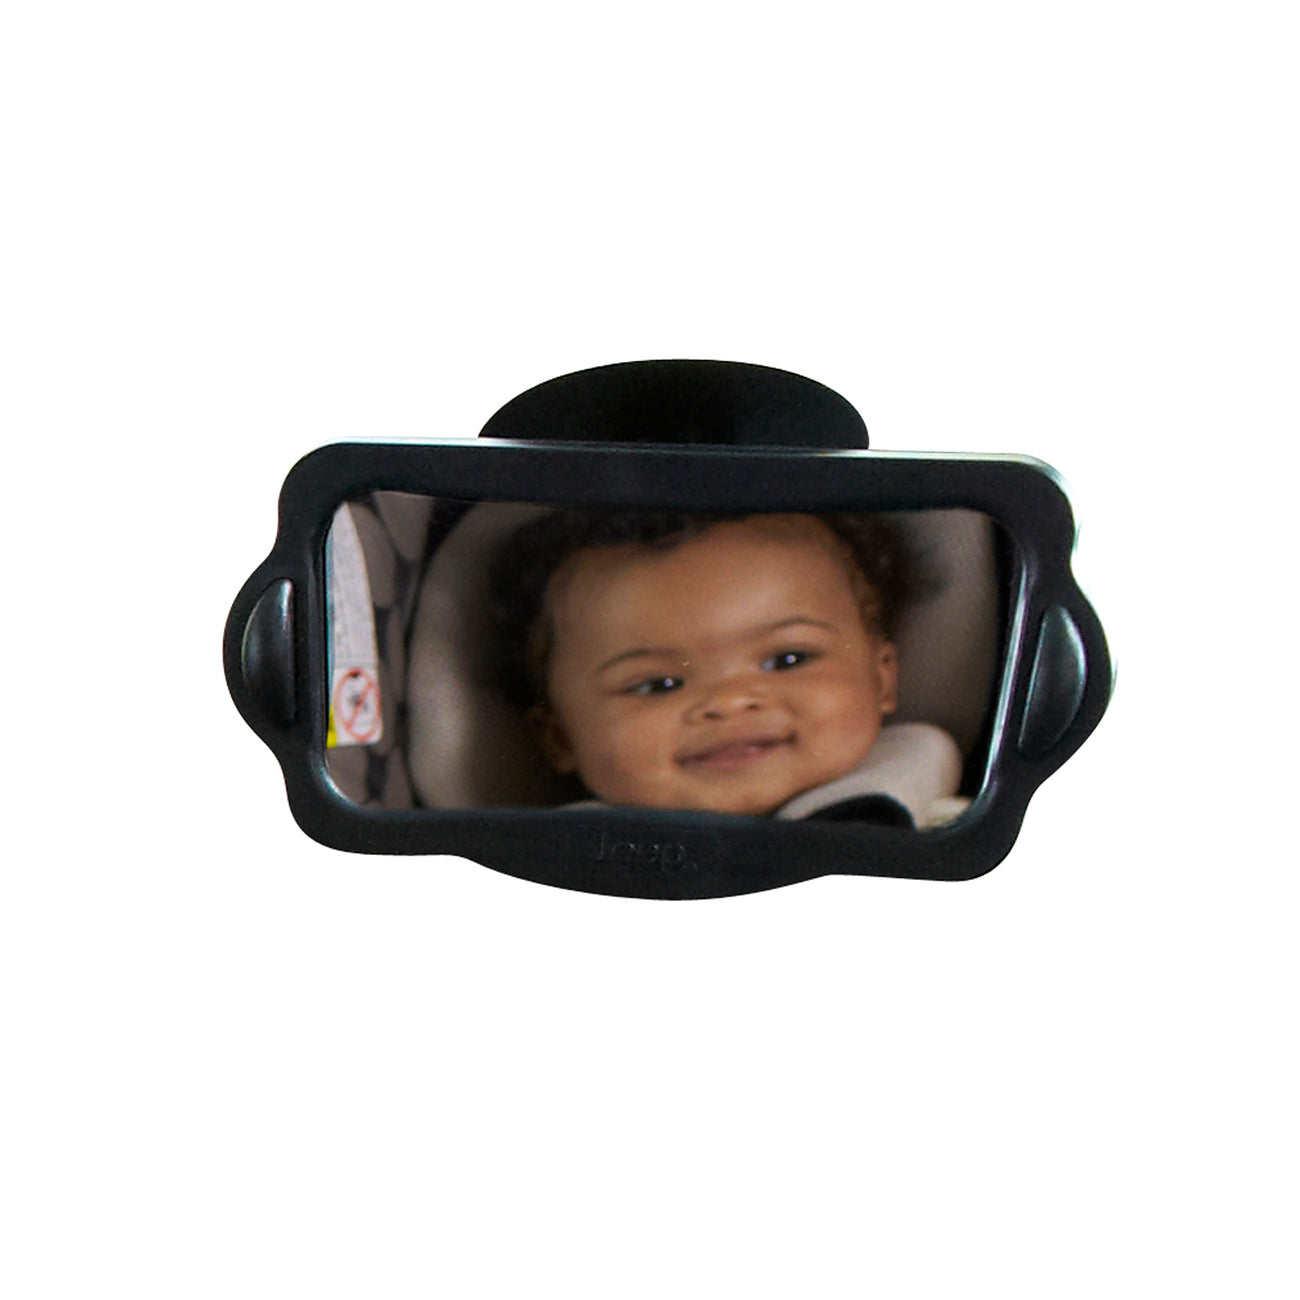 Baby View Mirror - Nuby US